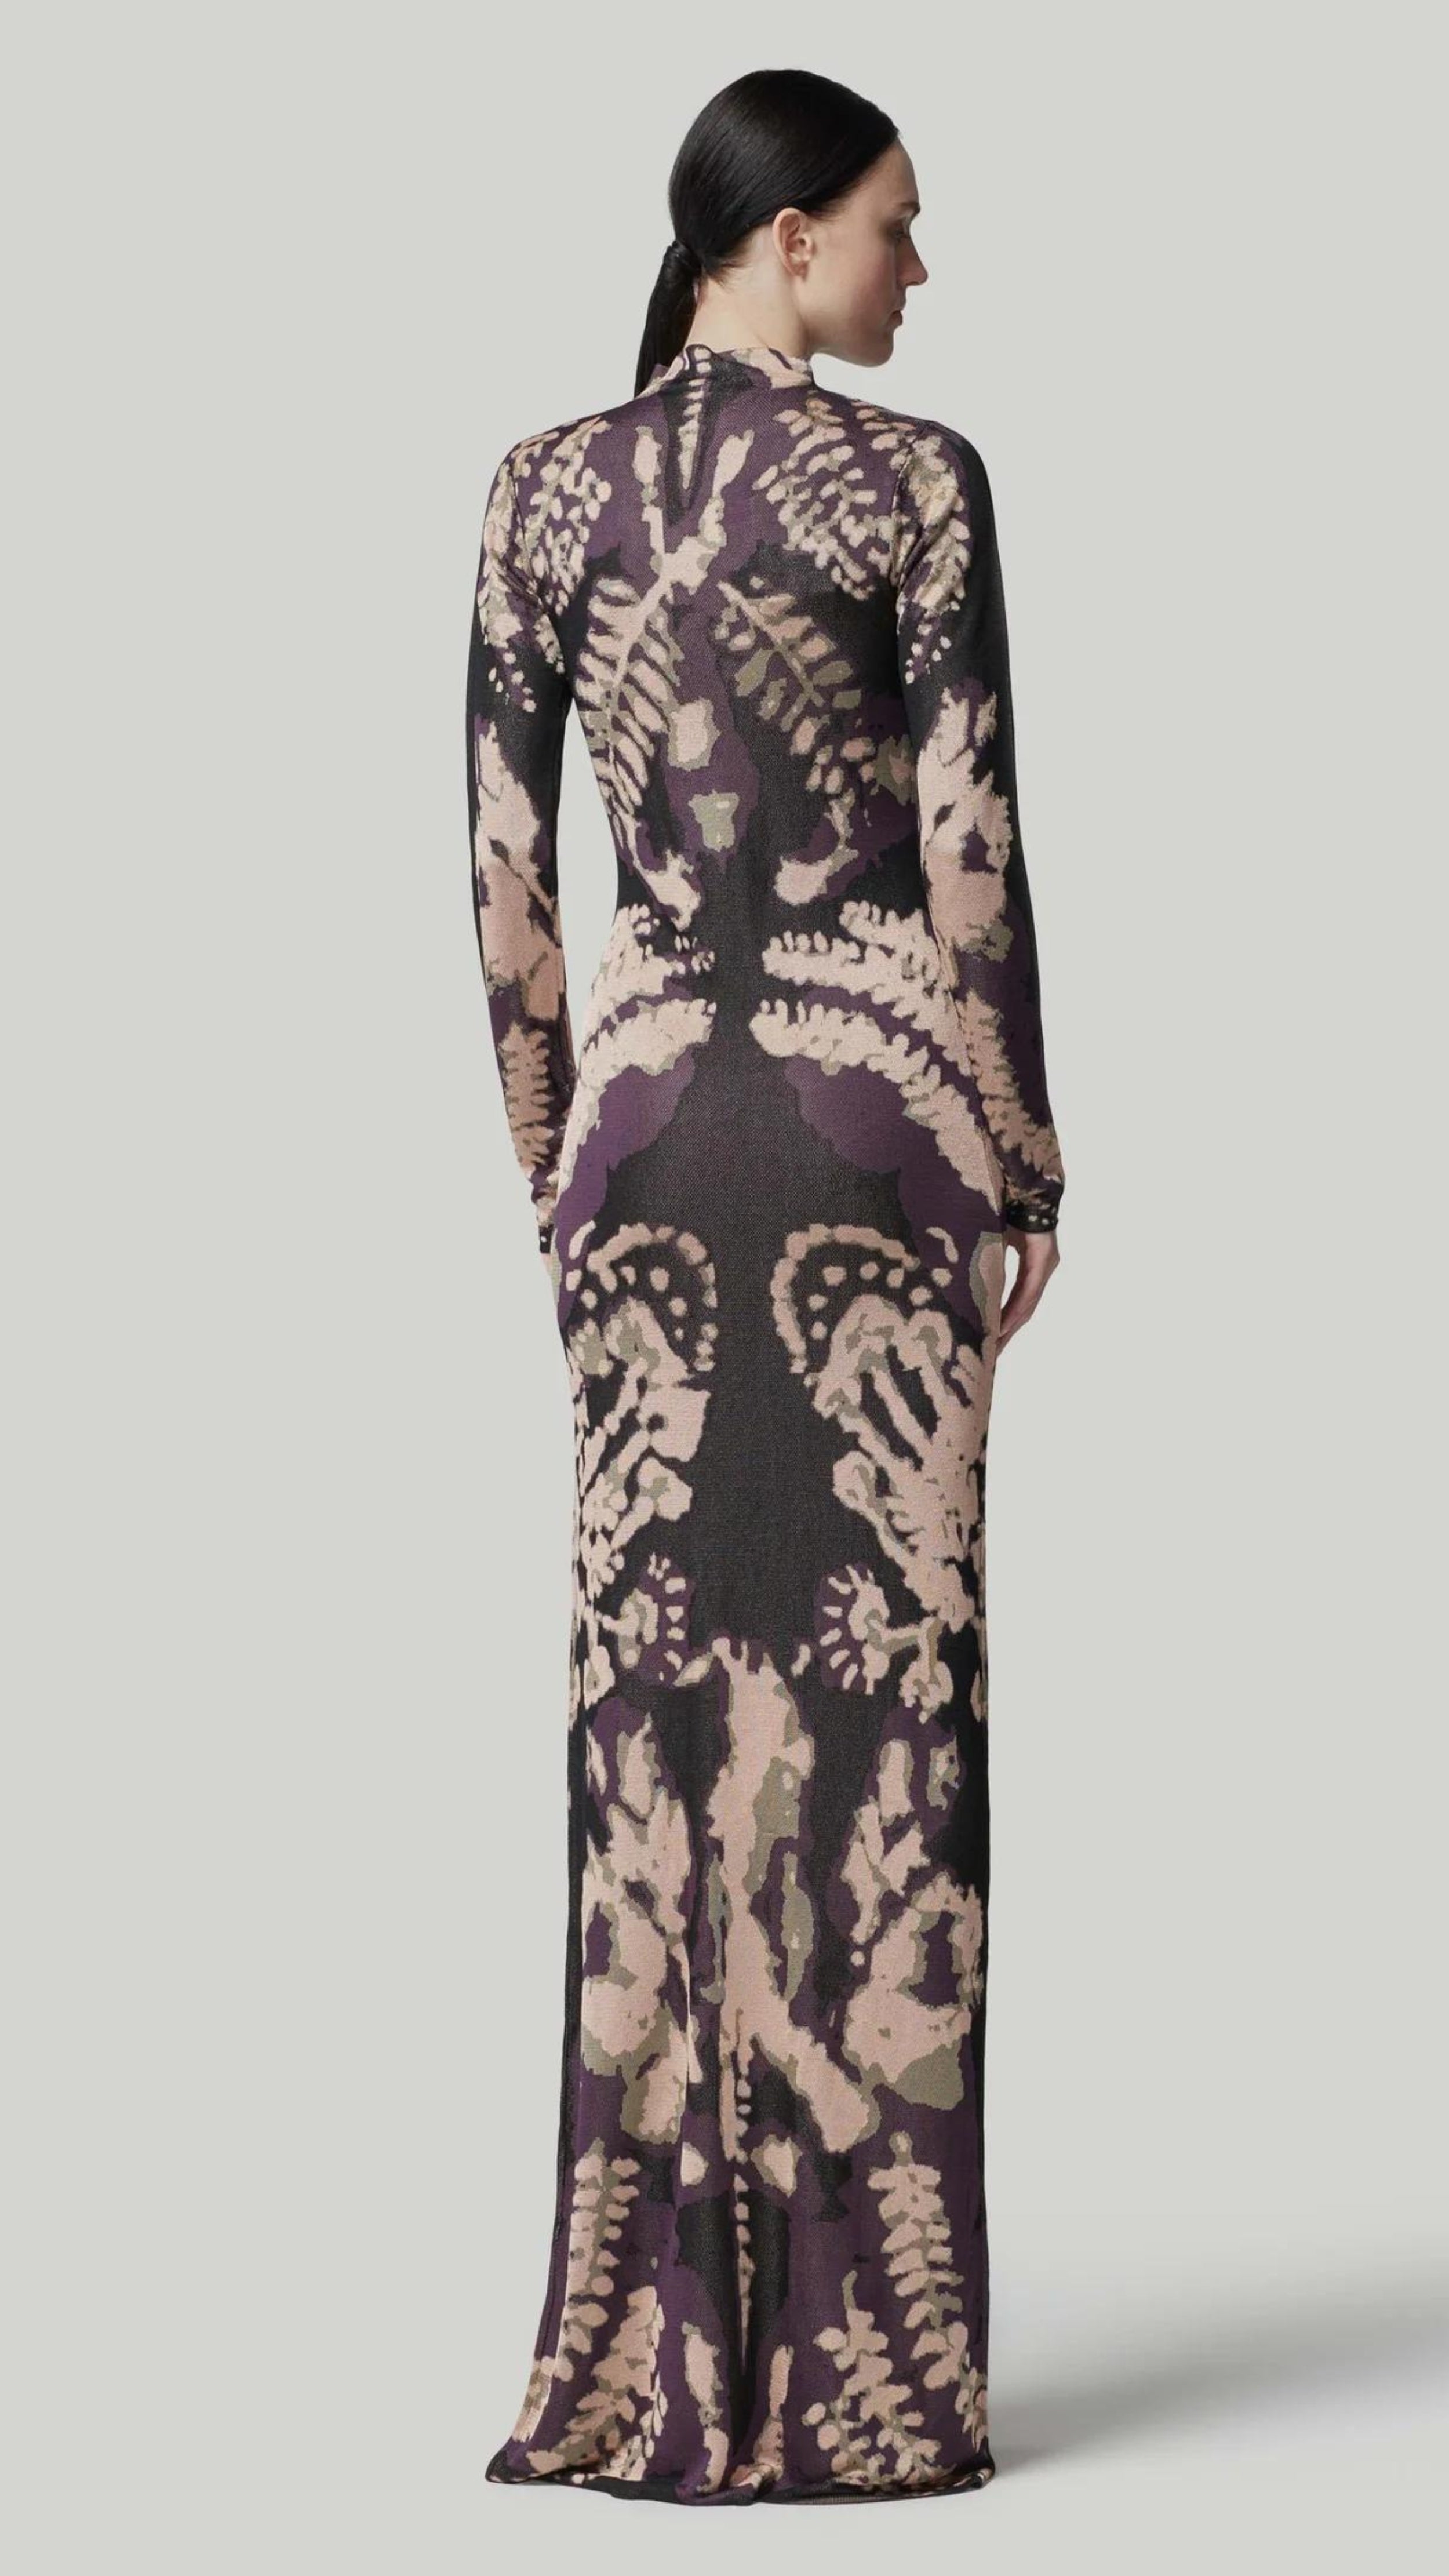 Altuzarra Rhea Dress. Knit dress in the rorschach in deep purple and pale pink. with a mock turtleneck, long sleeves and maxi length. Shown on model facing back